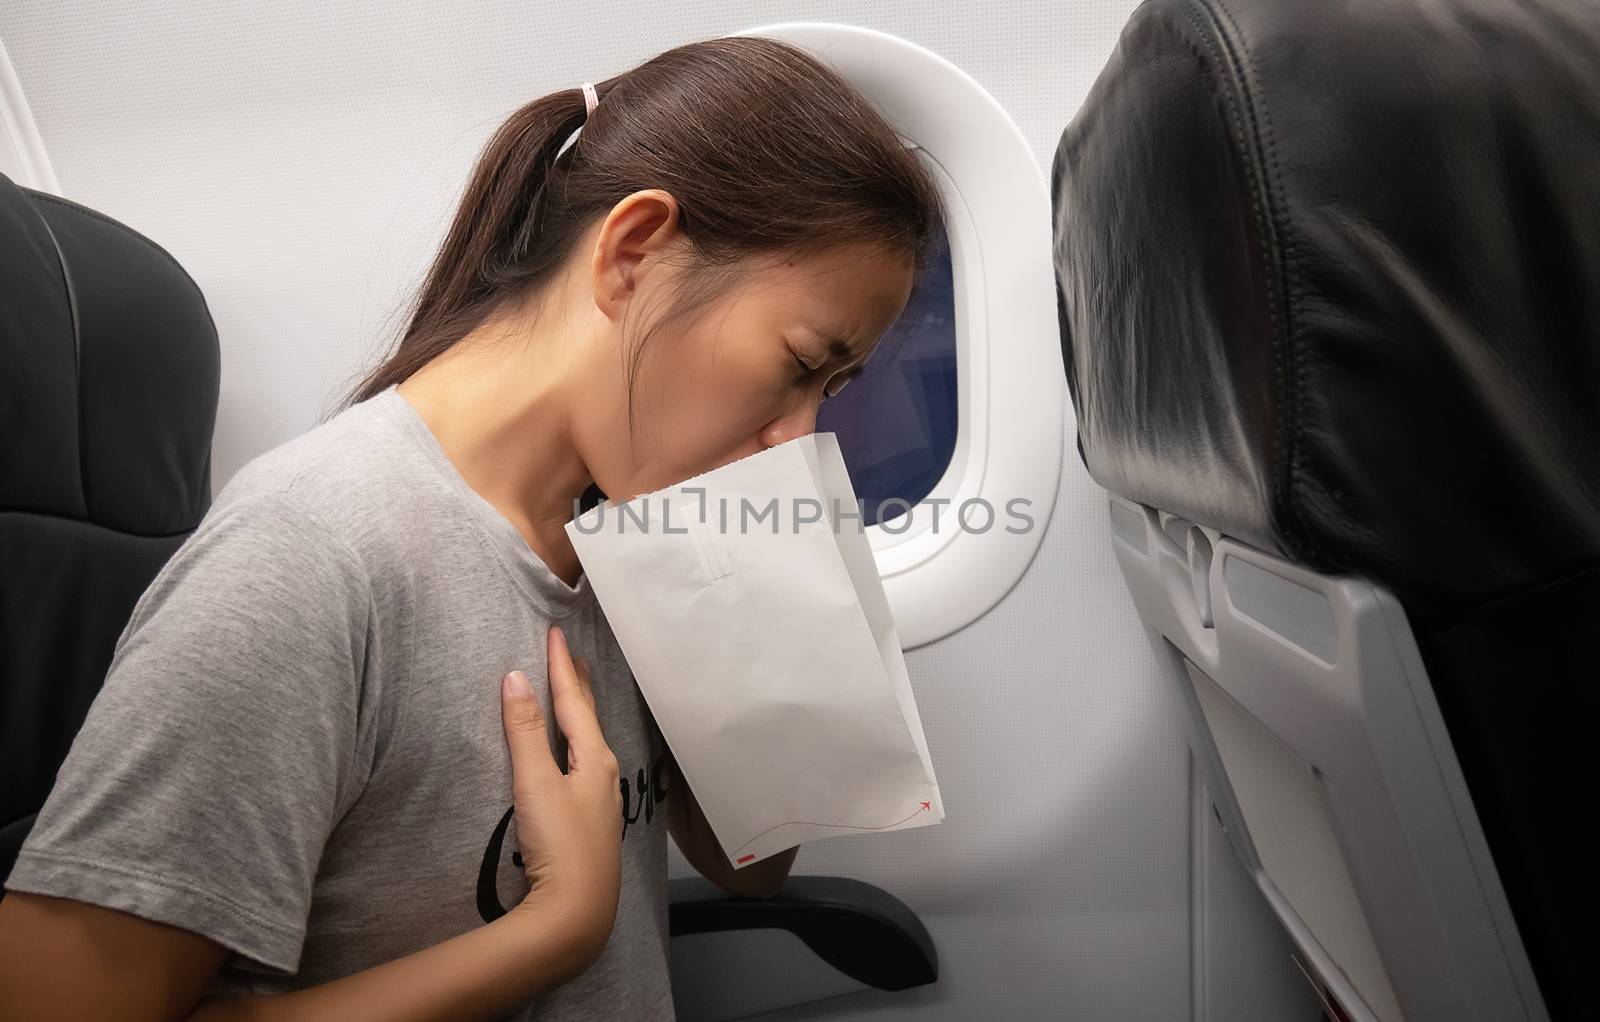 female passenger on the plane felt airsick, affected with nausea due to travel in an aircraft using air sickness bag for vomiting due to airsickness